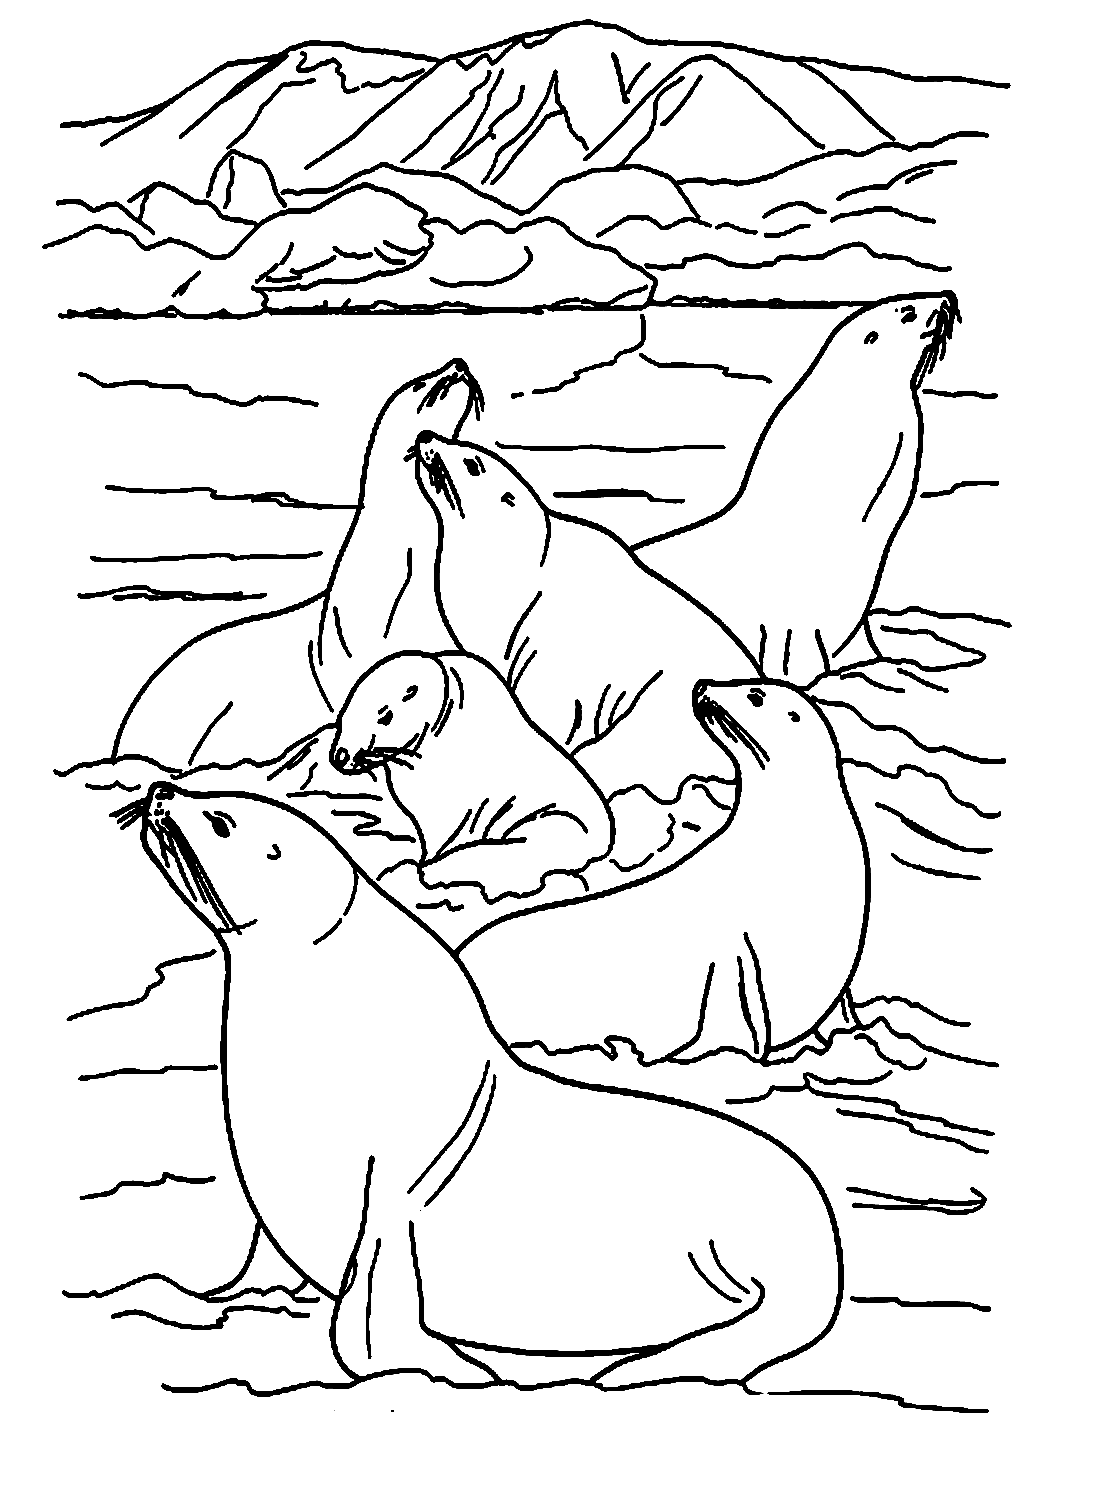 Raft Of Sea Lions from Sea Lion